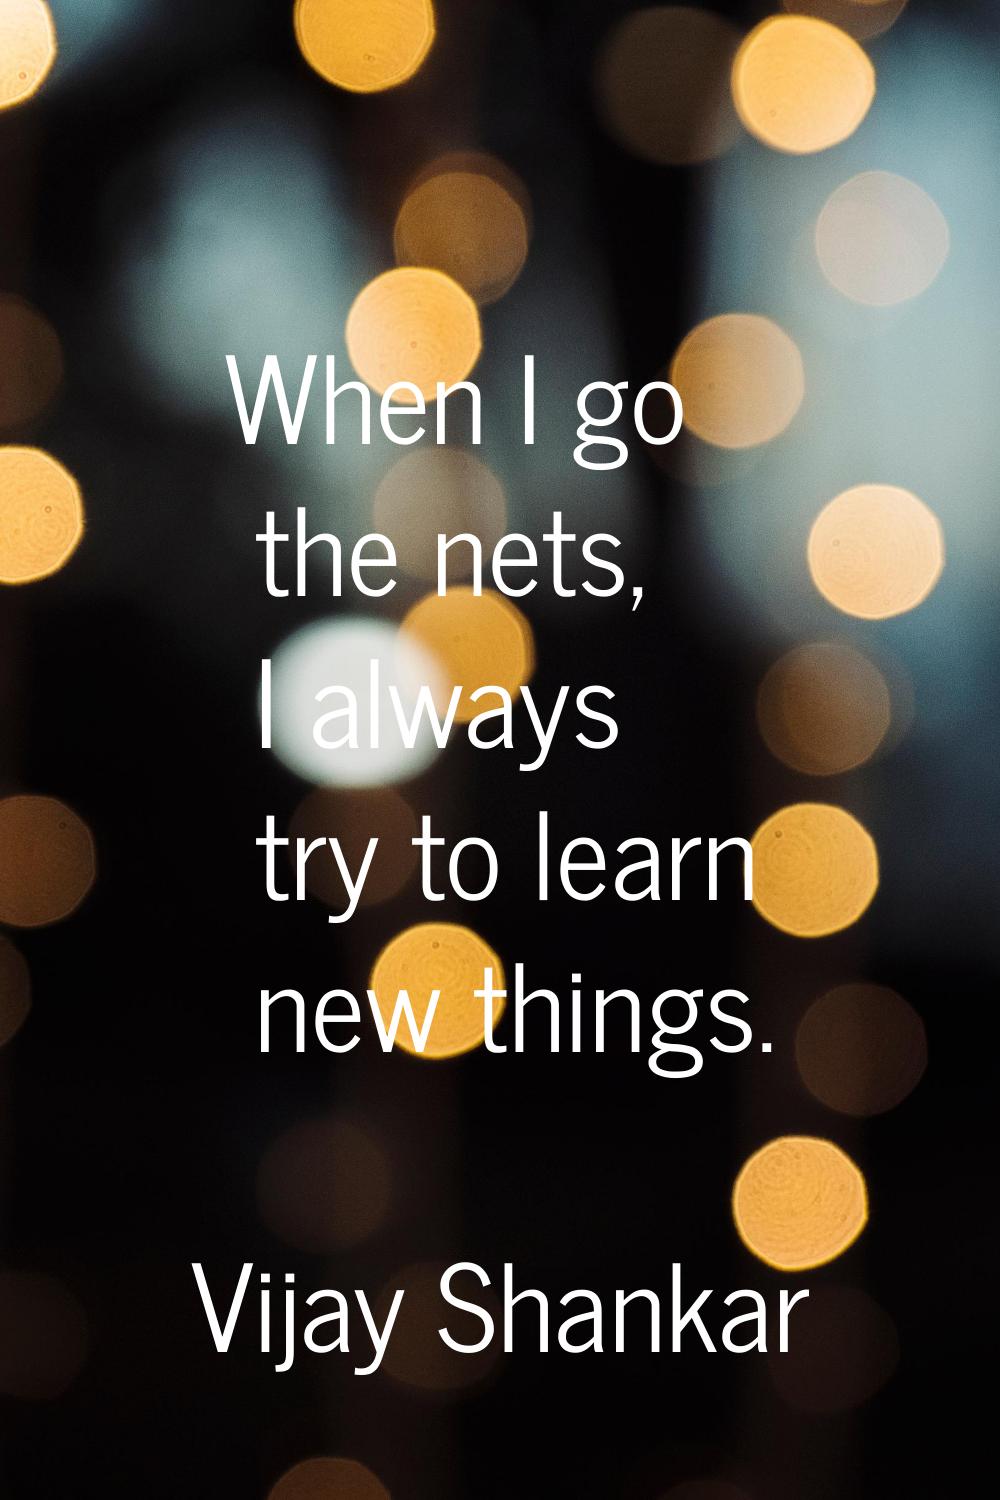 When I go the nets, I always try to learn new things.